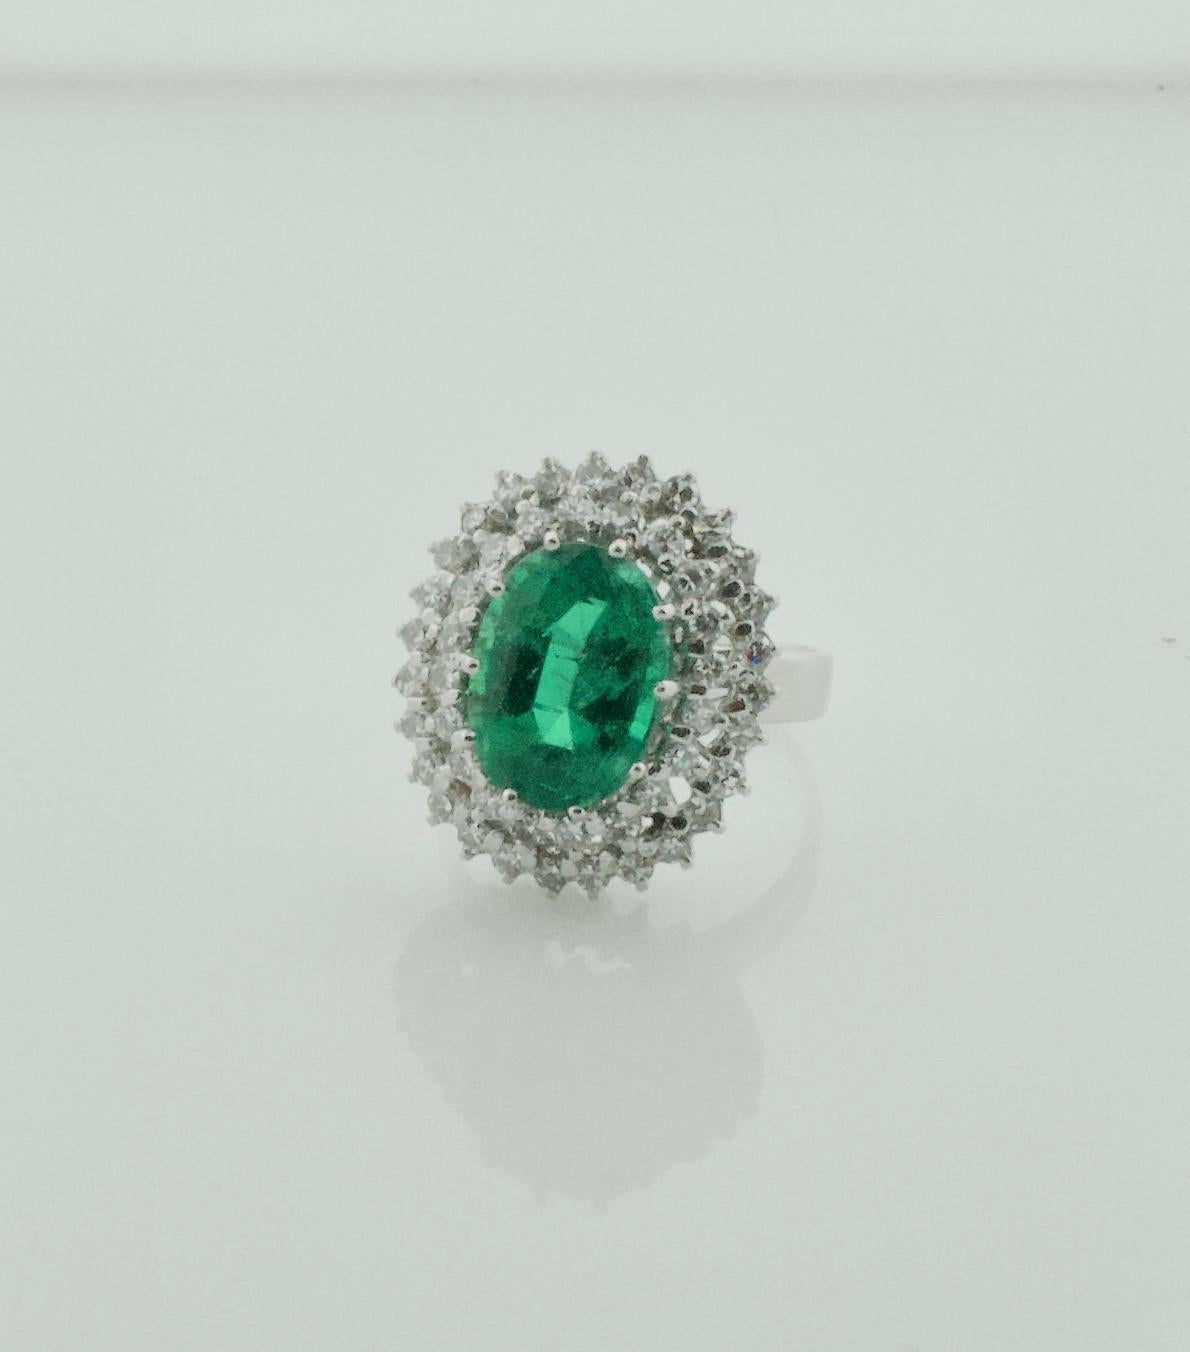 4.49 carat Emerald and Diamond Ring in 18k with G.I.A. Certificate
One Oval Emerald  weighing 4.49 carats 
Forty Seven Round Cut Diamonds weighing 1.05 carats approximately [GHI  VVS- SI1]
Currently Size 6.5 Can Be Sized By Us Or Your Qualified